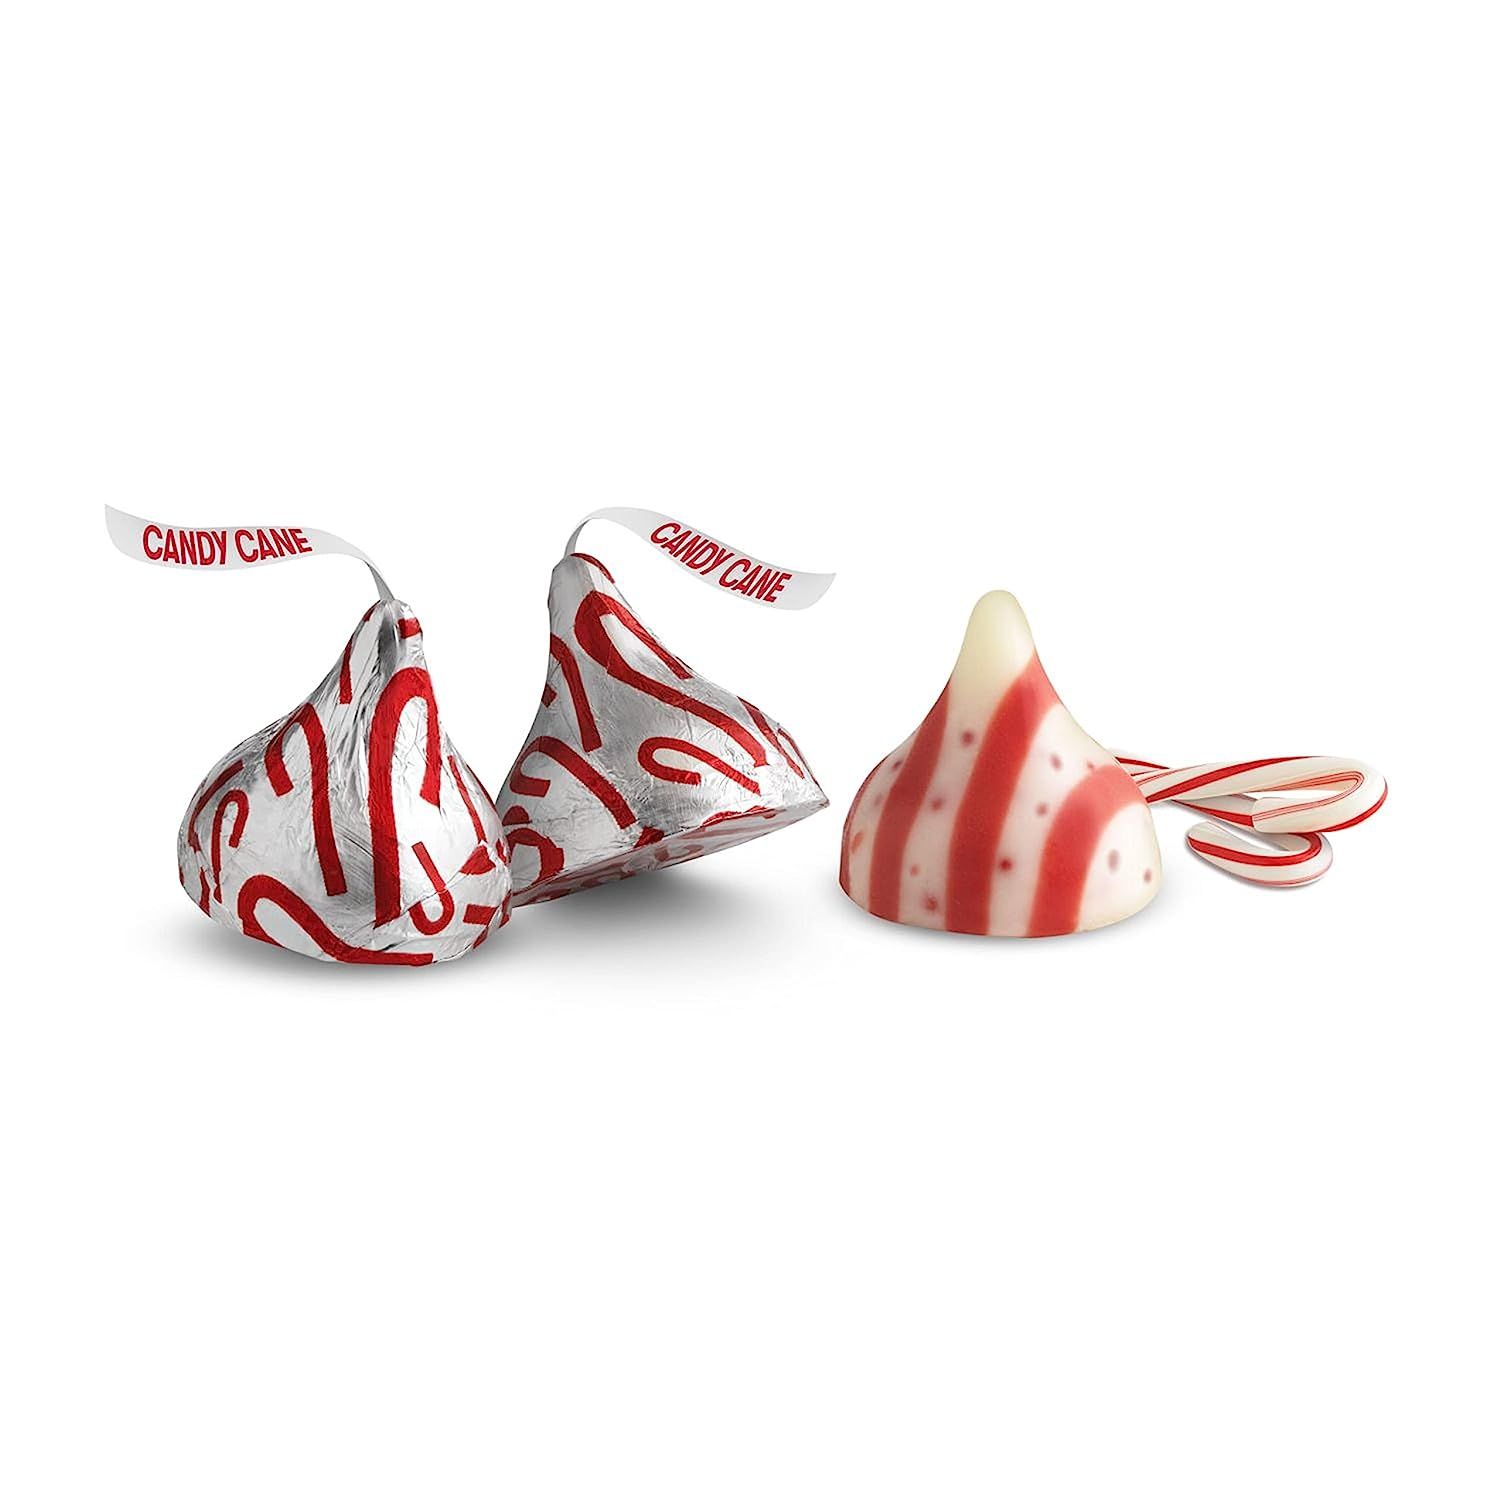 HERSHEY'S KISSES Candy Cane Mint Candy with Candy Bits, Holiday, 30.1 oz Bulk Bag | Amazon (US)